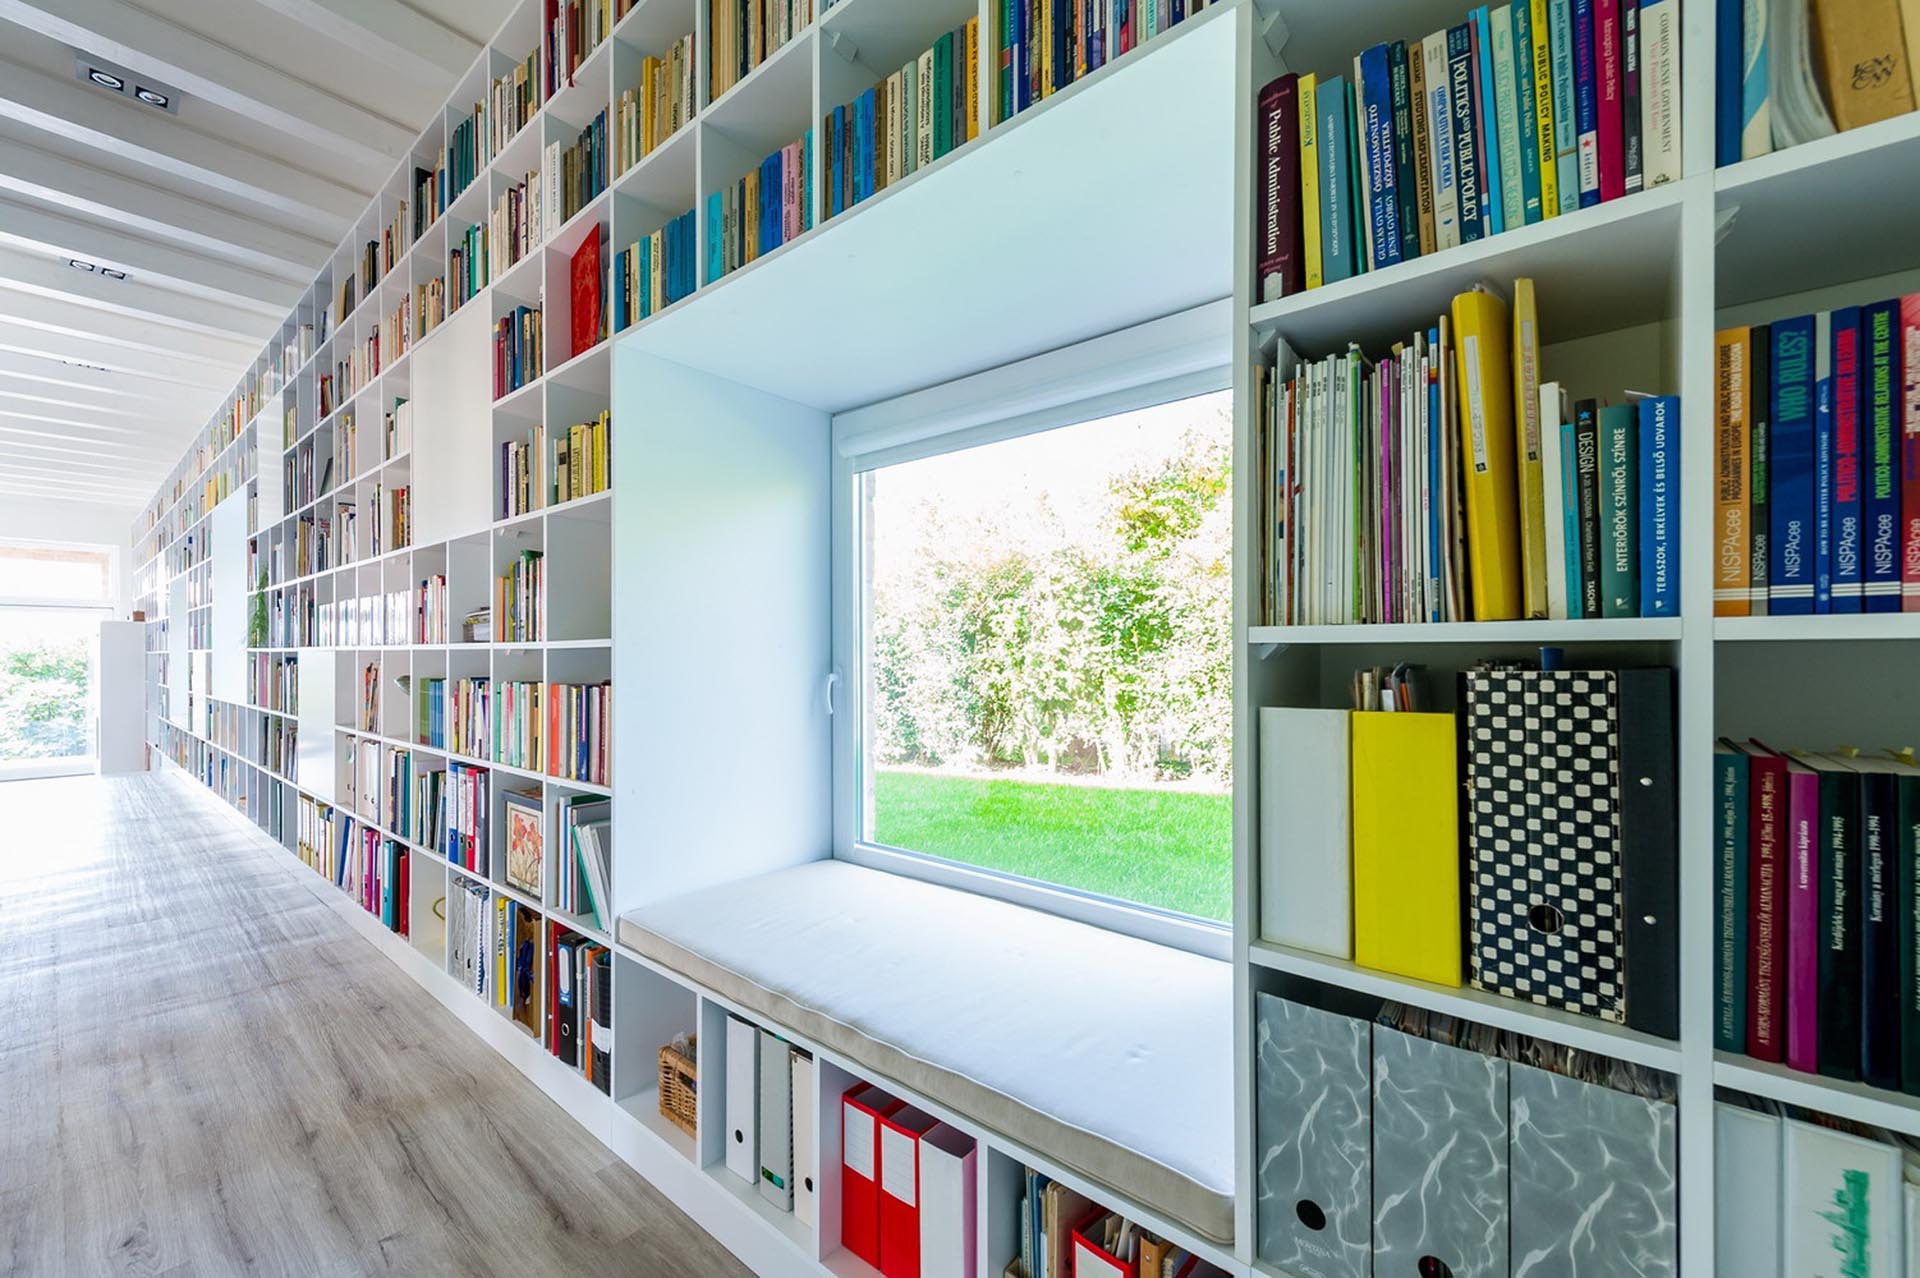 An entire wall is filled with bookshelves and includes window seats.